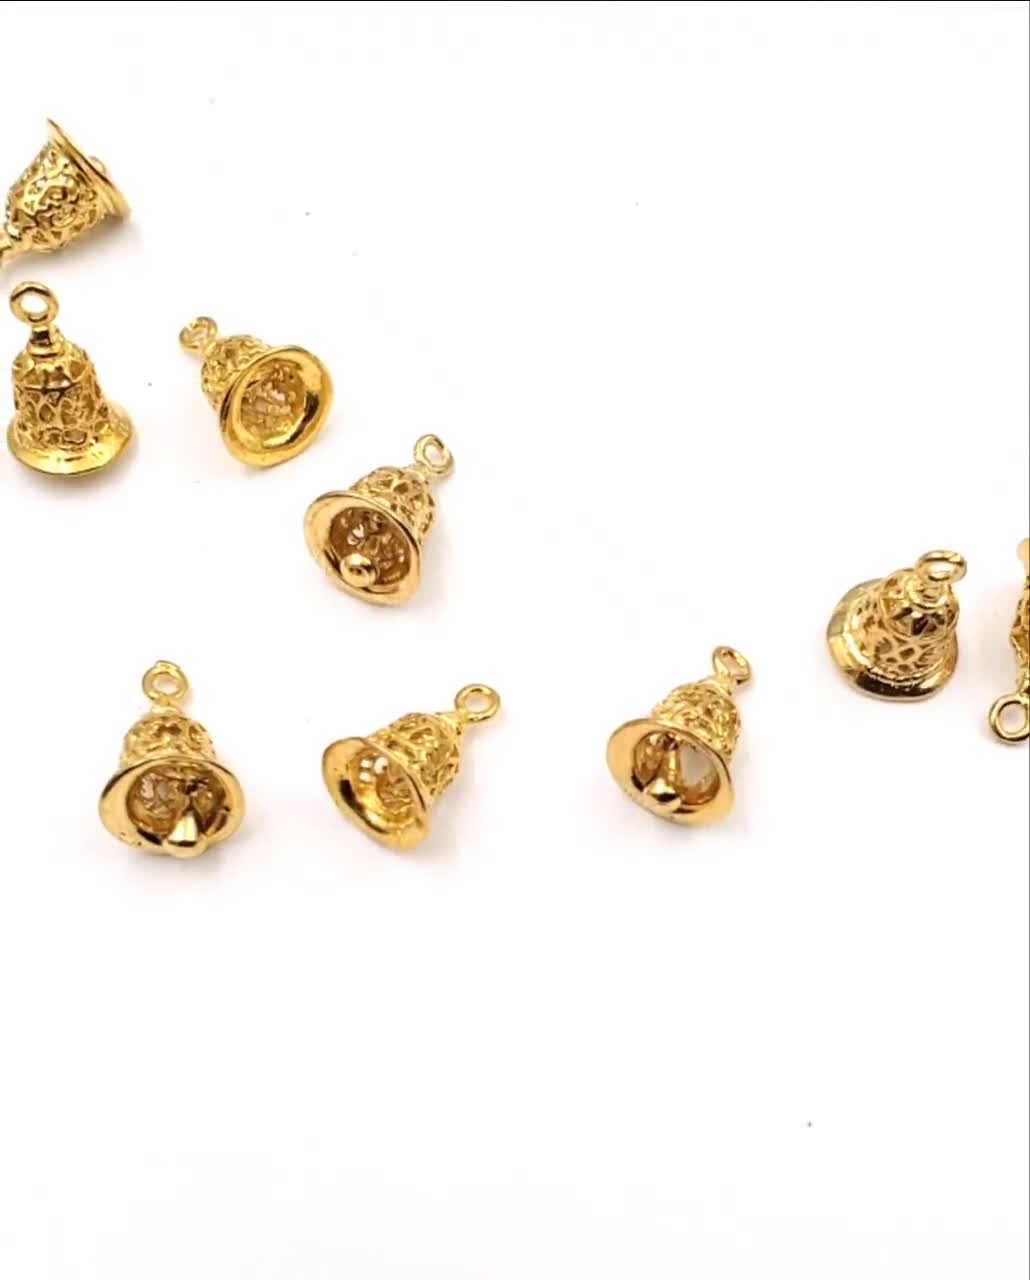 Bells 100 pieces 6mm Gold color Steel Jewelry Craft Supplies Jewelry Bell  charms